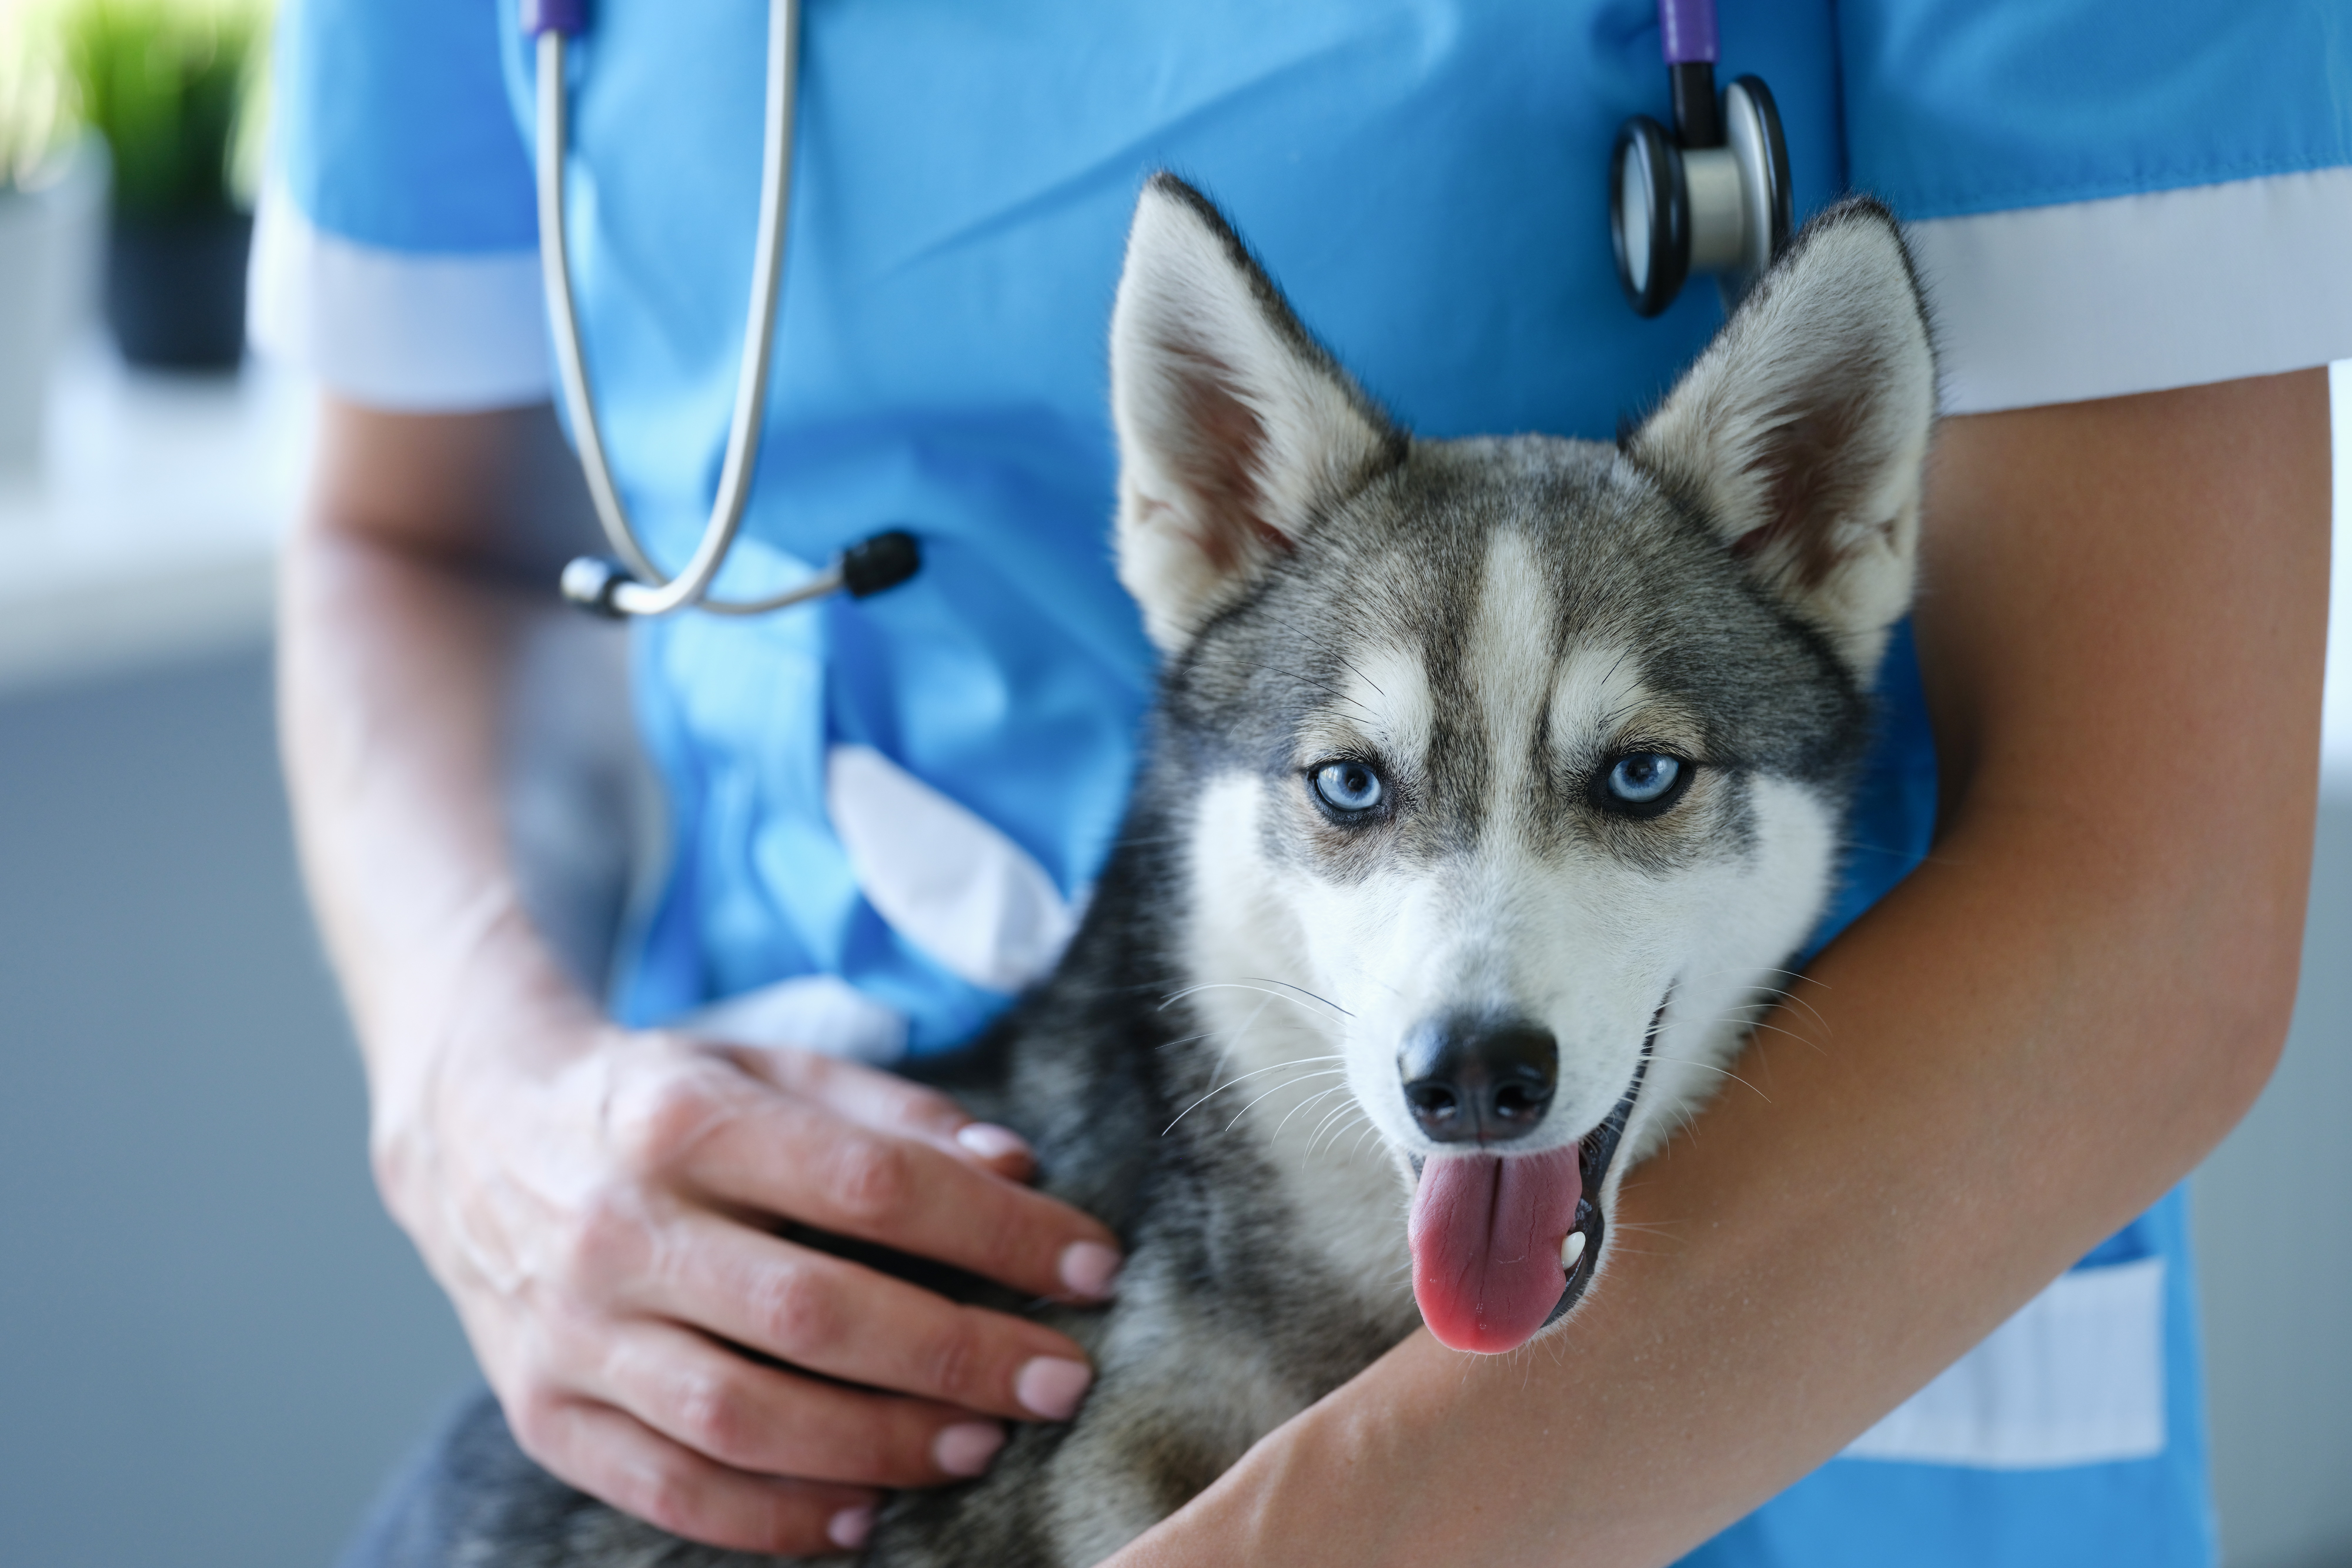 Study shows anaesthesia risks in dogs are low